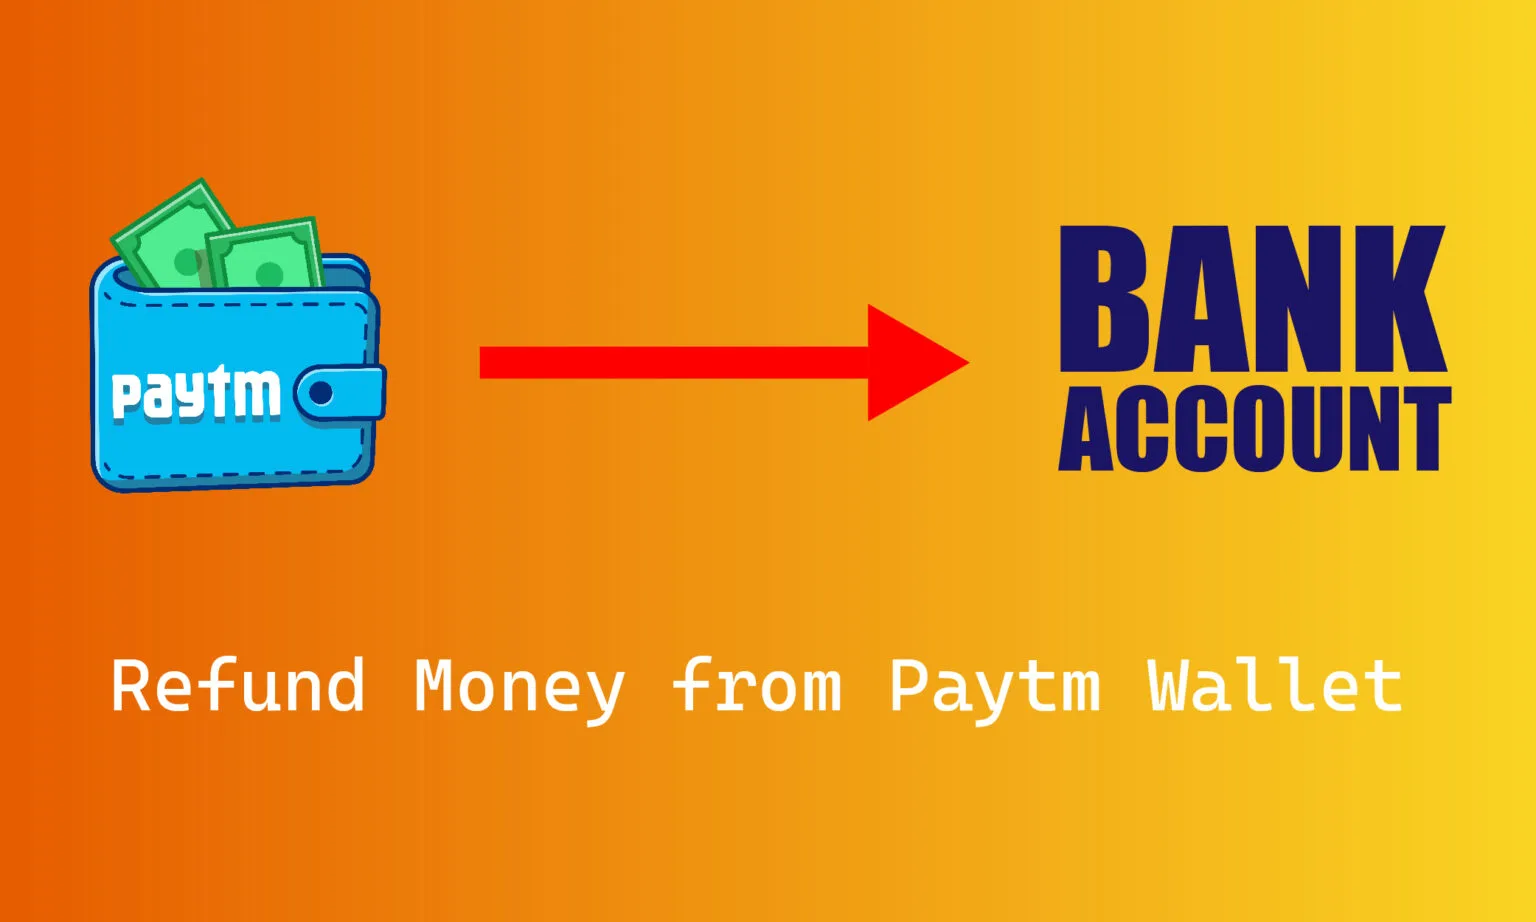 How to Refund Money from Paytm Wallet